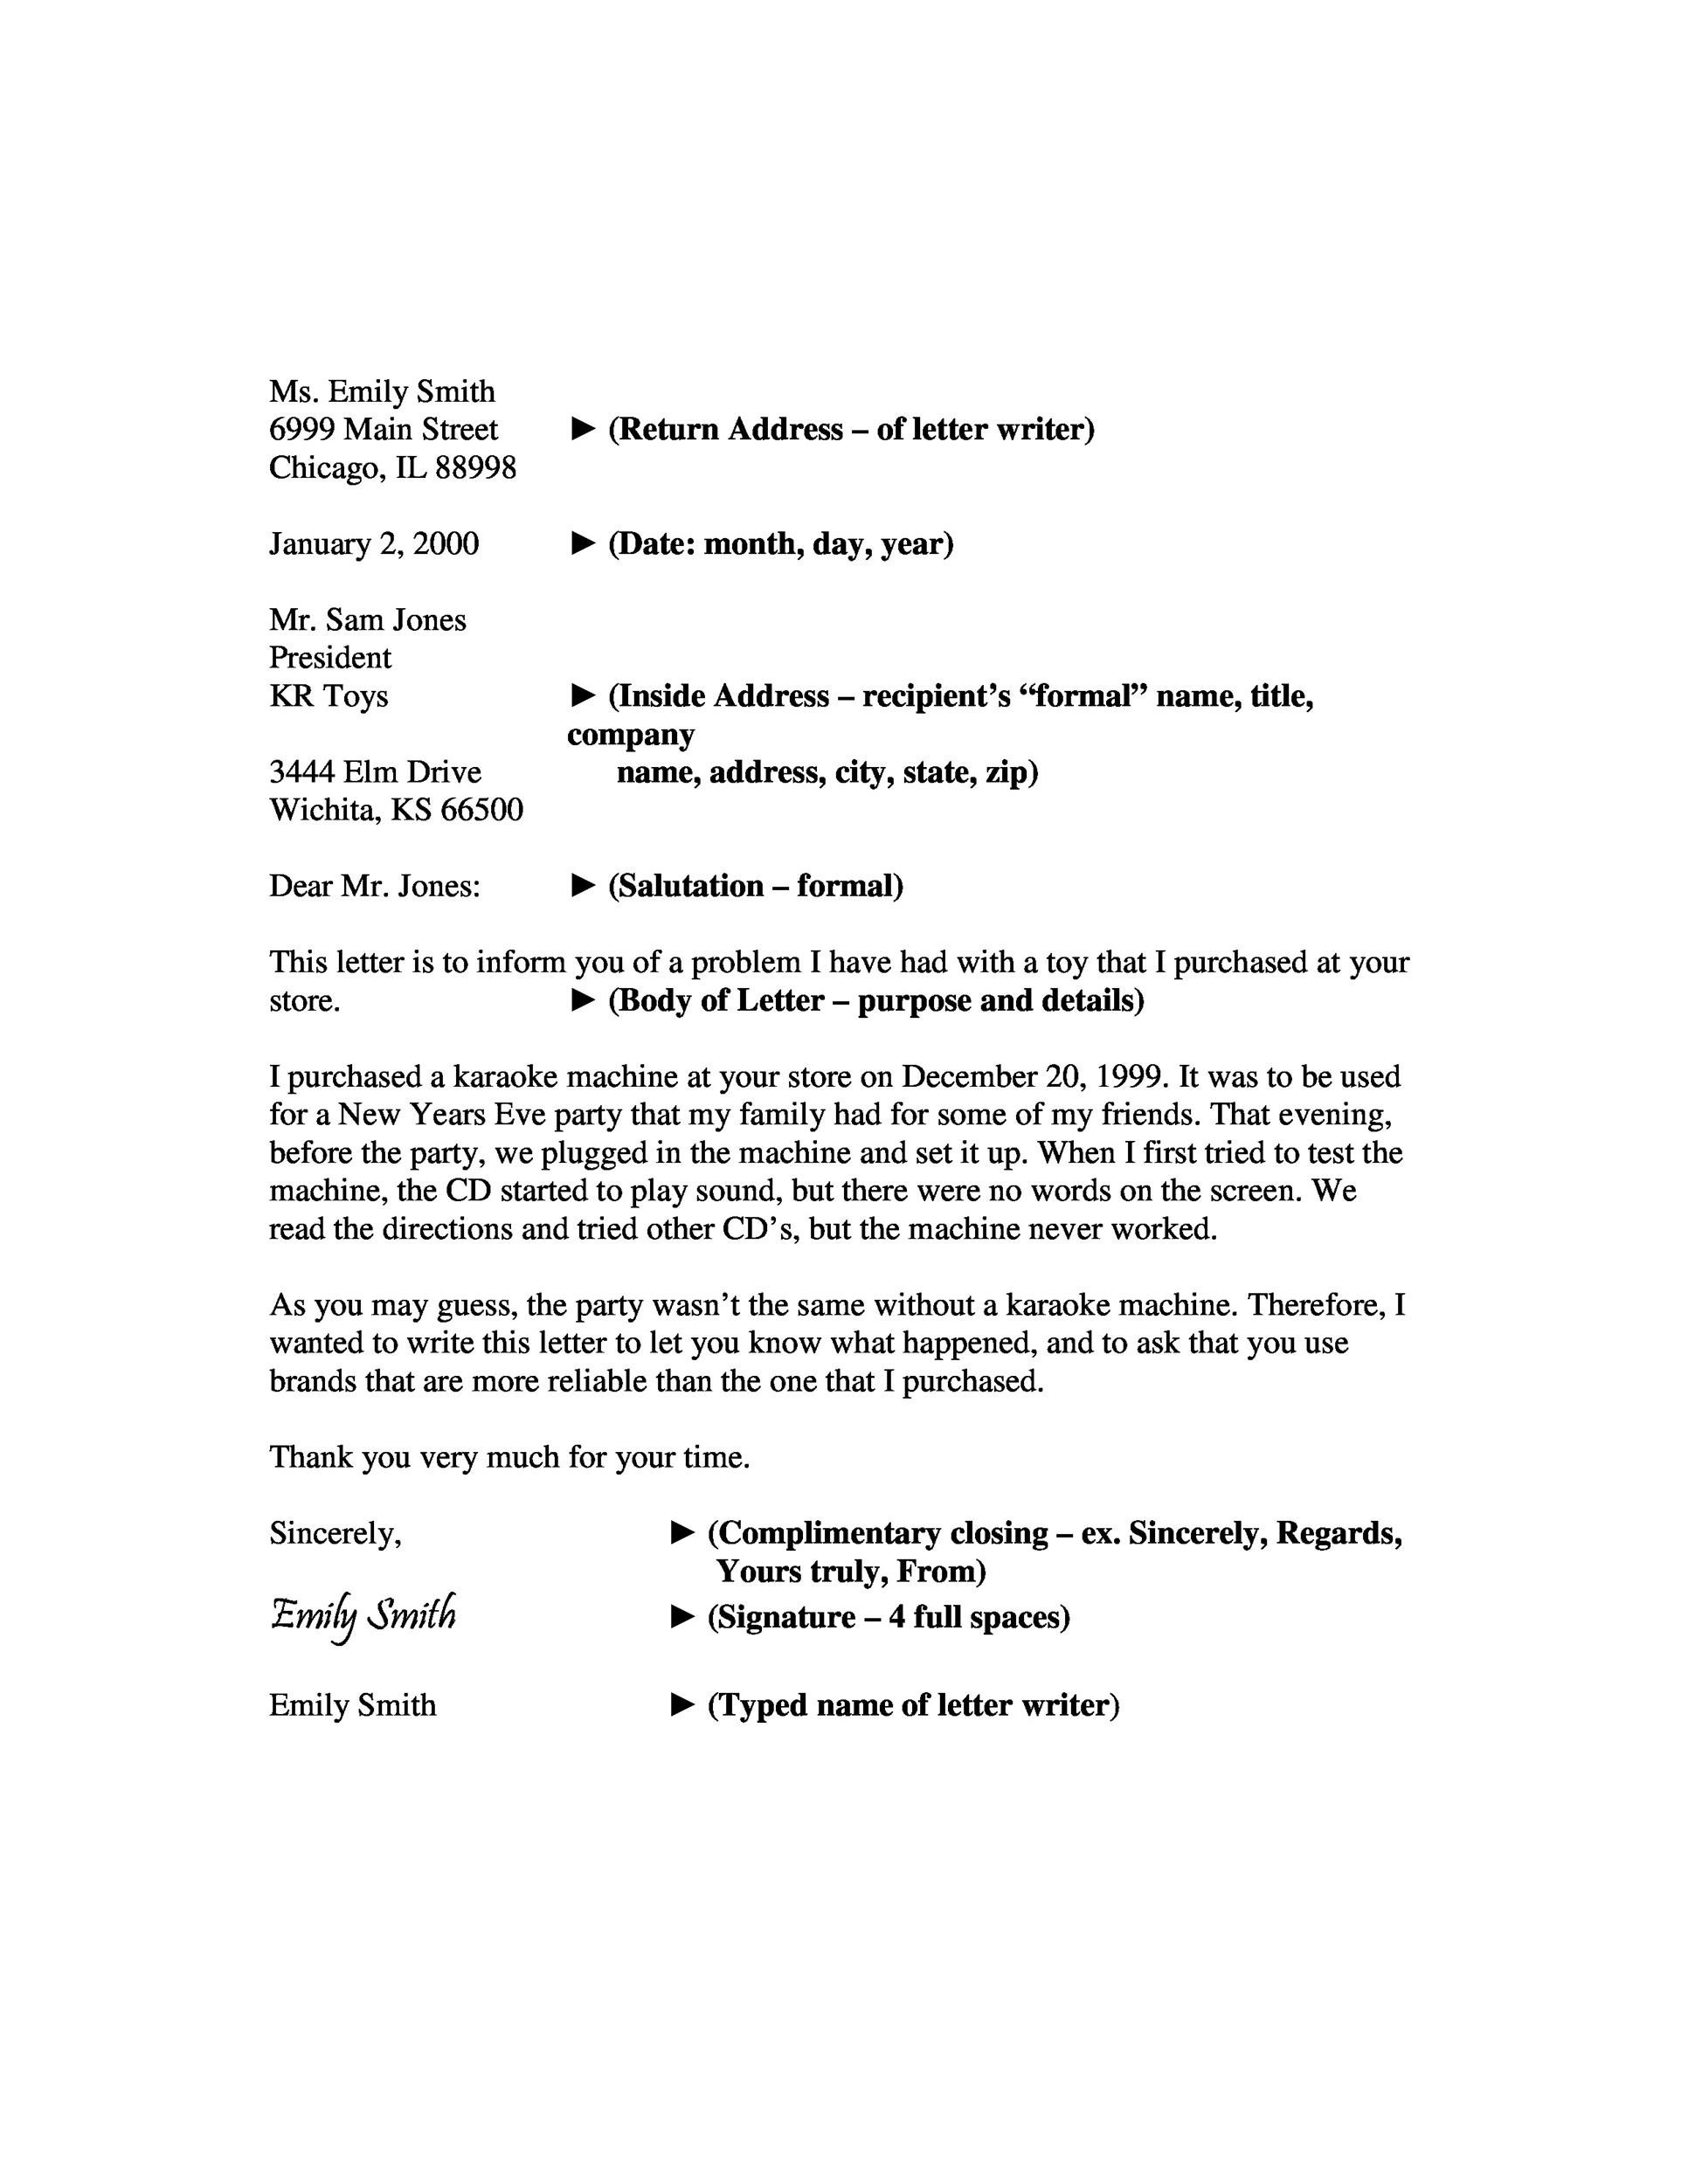 35 Formal / Business Letter Format Templates & Examples ᐅ ...